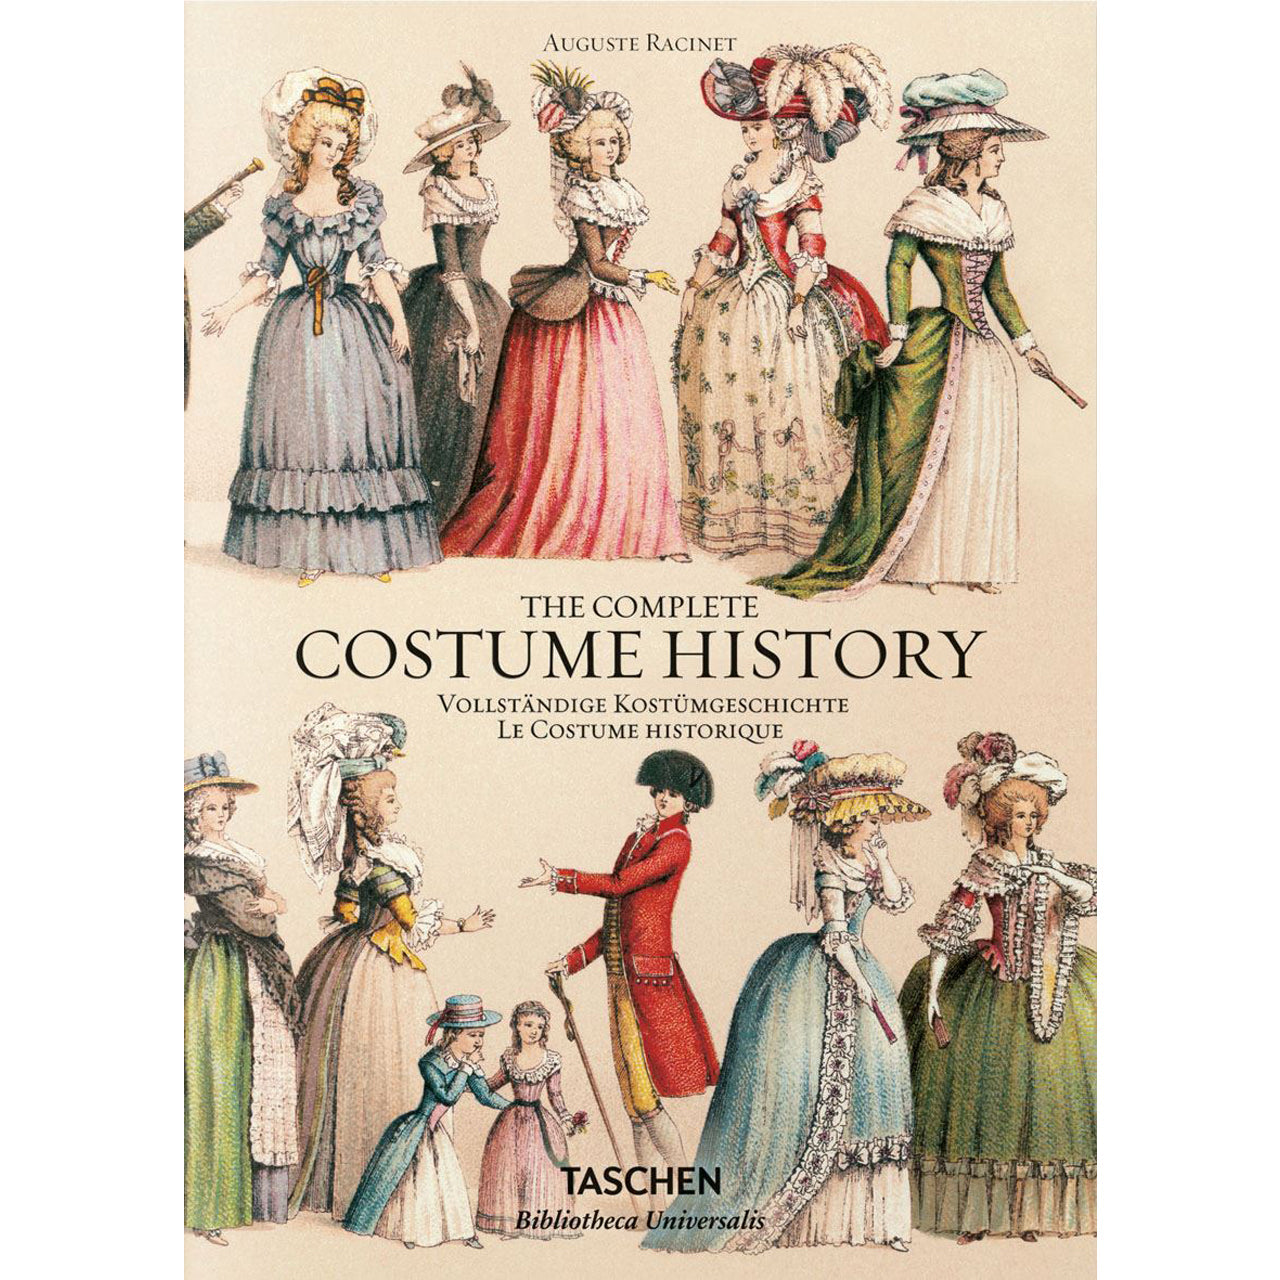 The Complete Costume History by Auguste Racinet Glyndebourne Shop